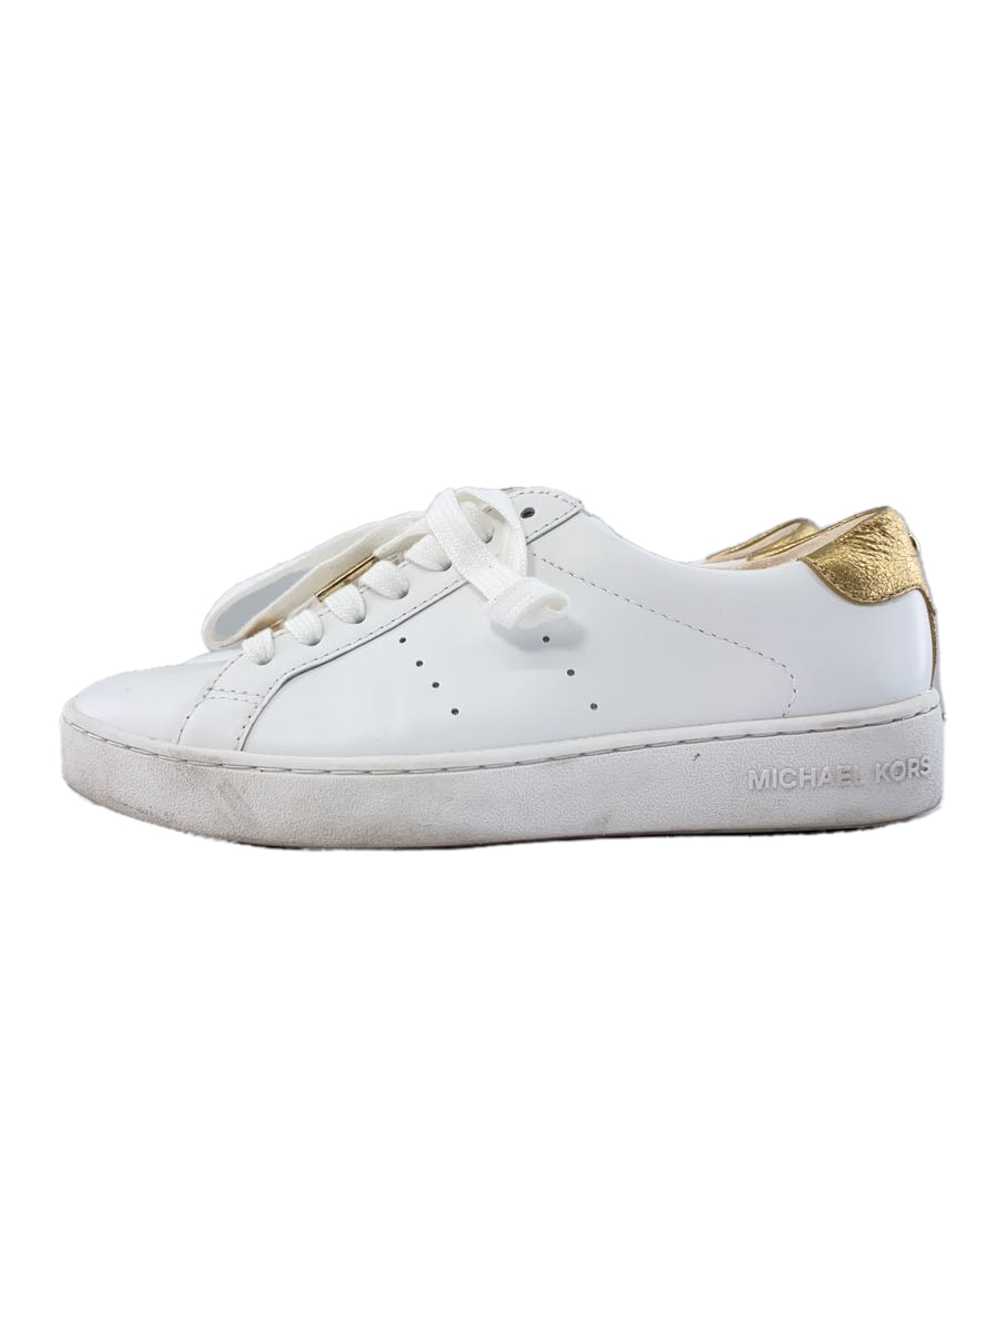 Michael Kors Low Cut Sneakers/36/White/Leather/Hx… - image 1